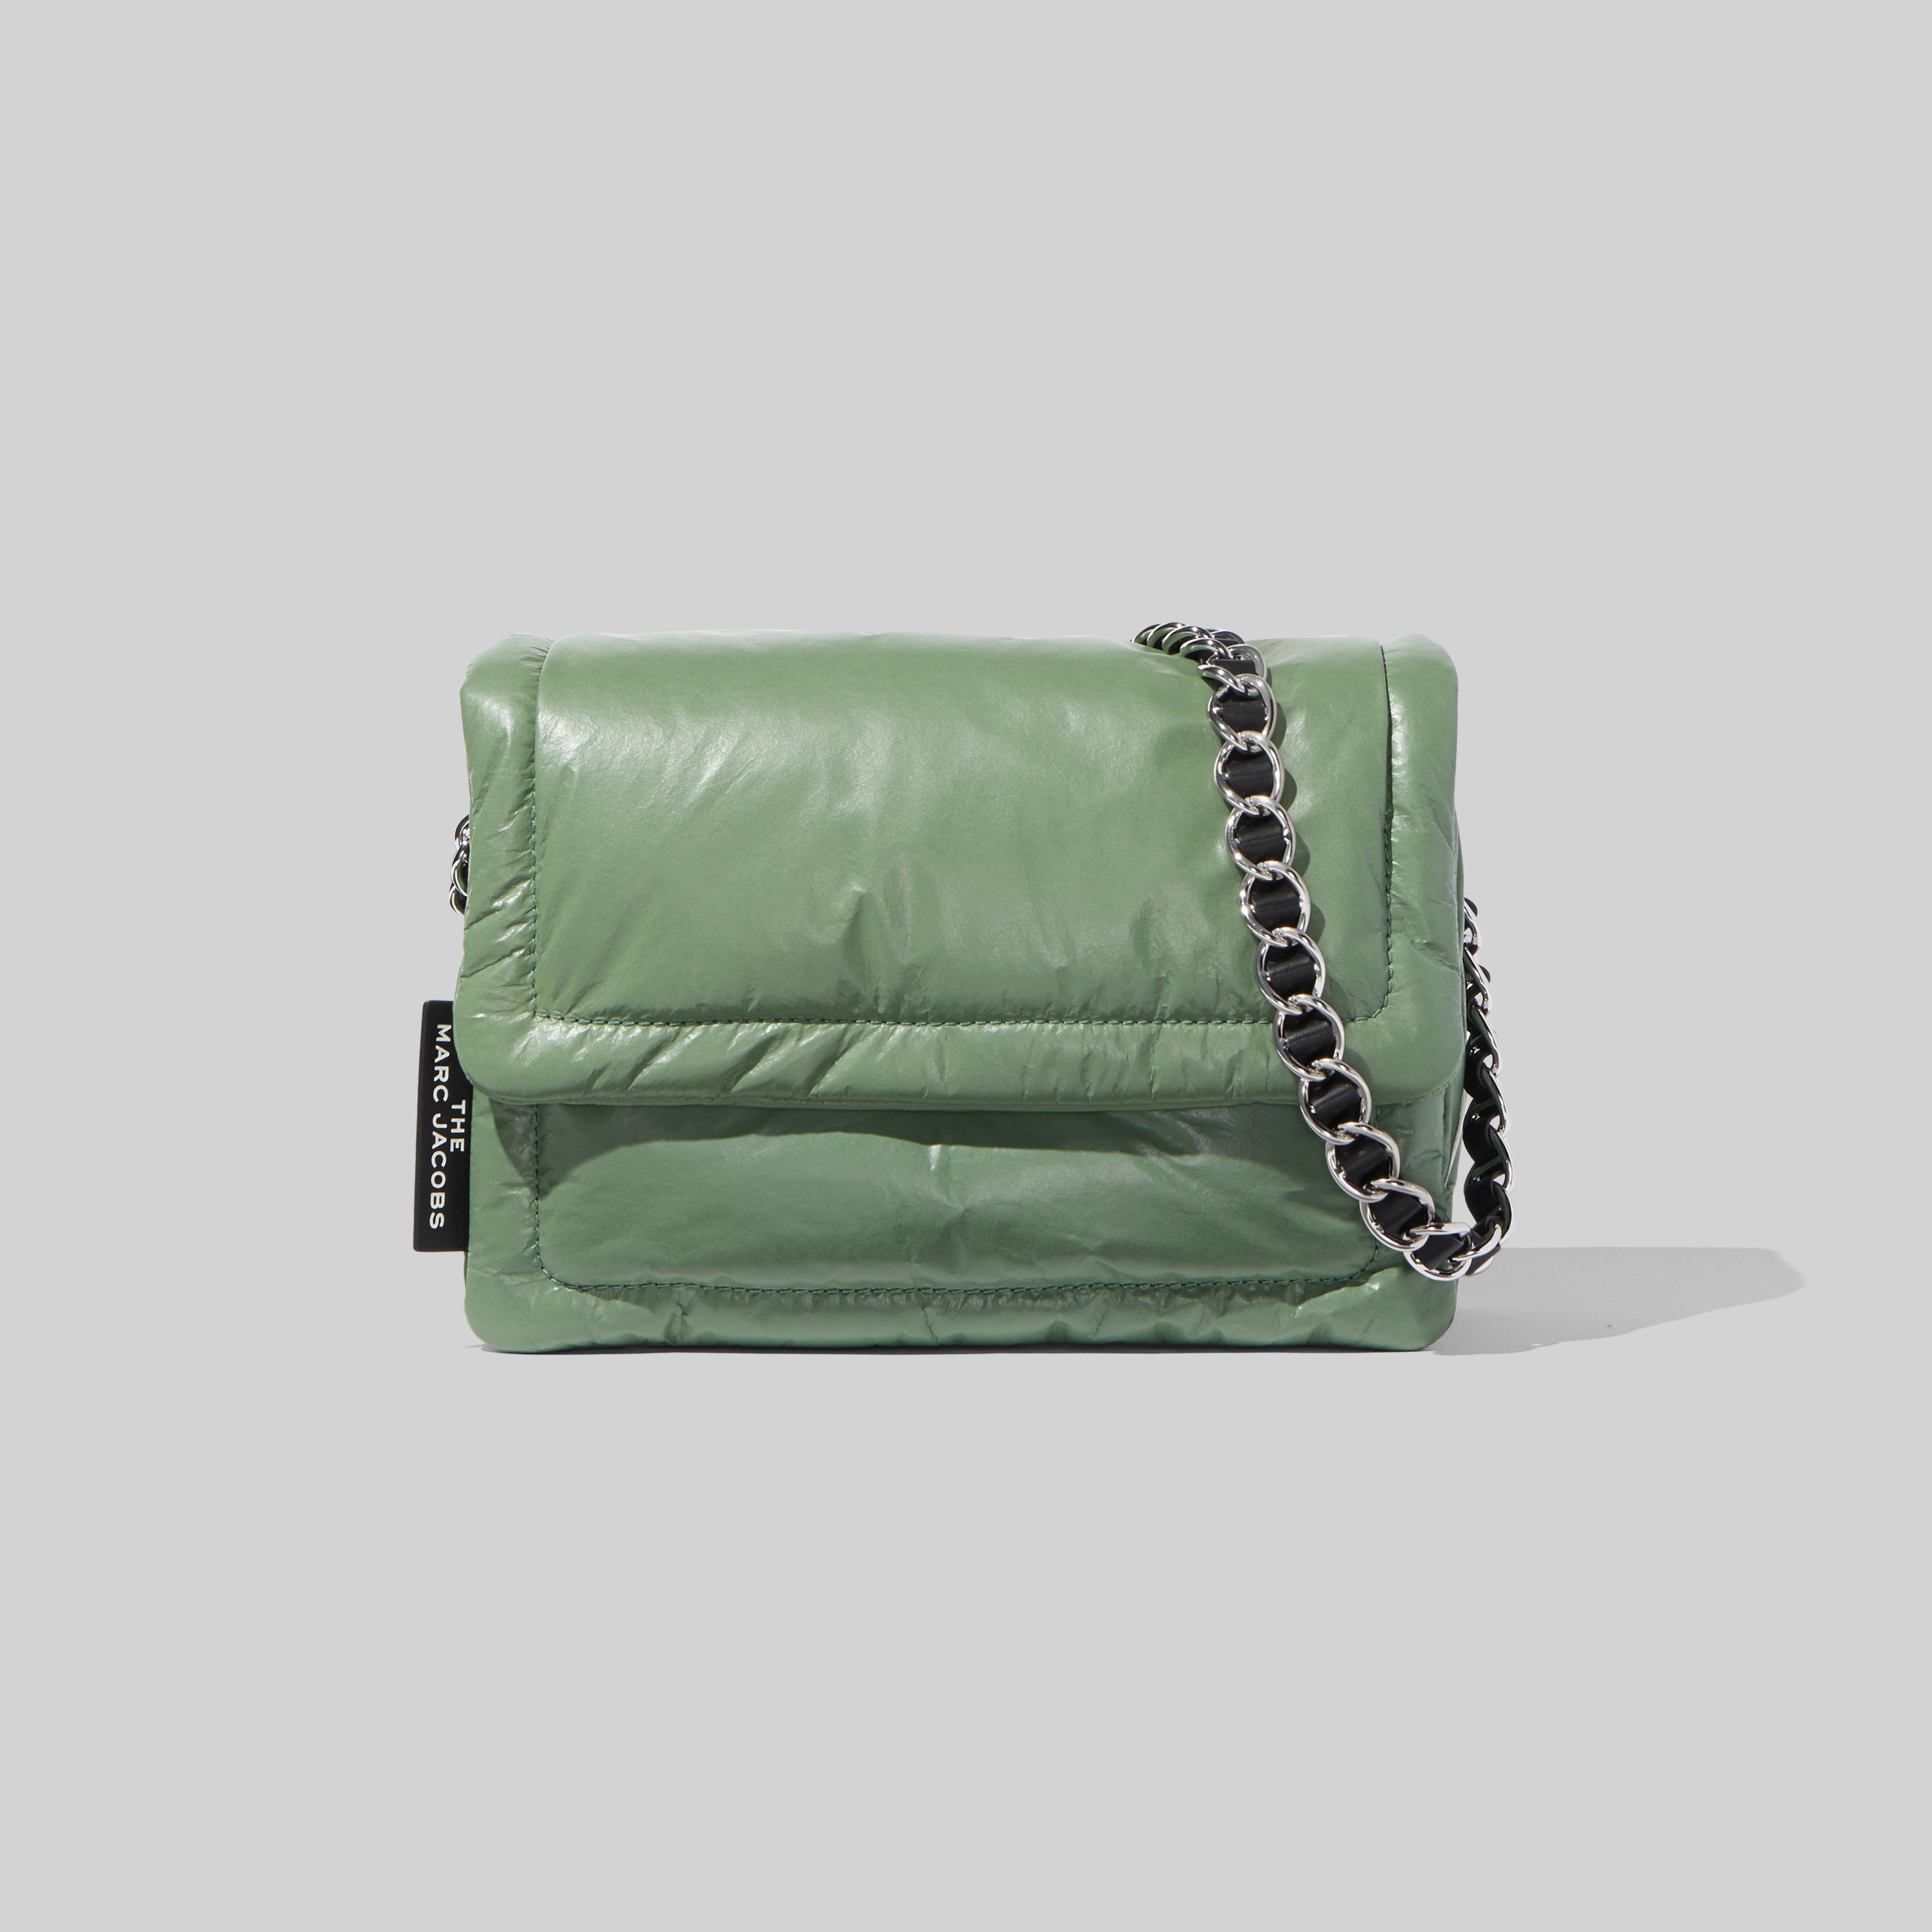 Marc Jacobs - THE Pillow Bag in Oregano 🌿 Shop now